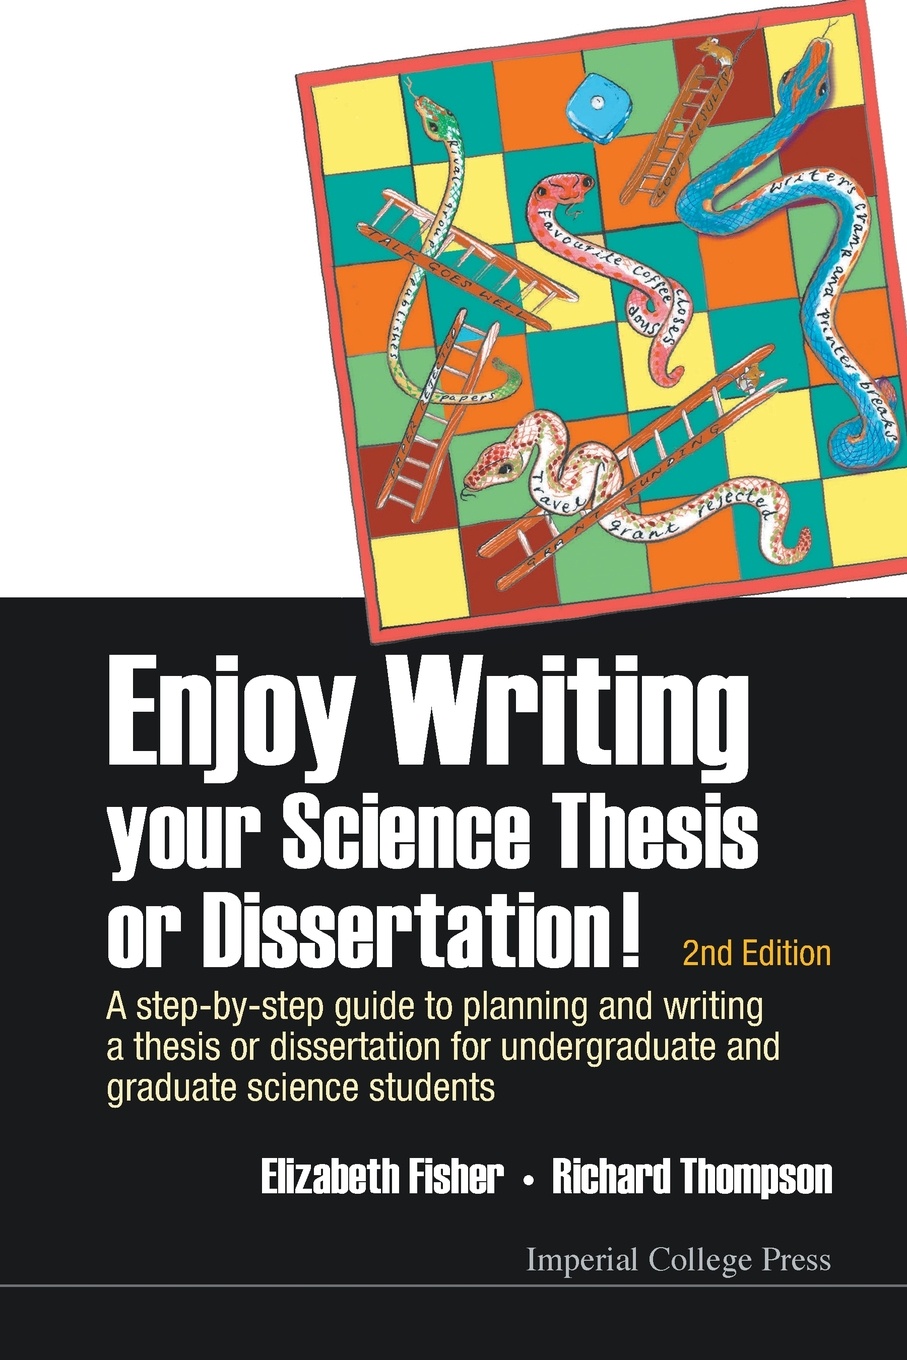 Enjoy Writing Your Science Thesis or Dissertation!. A Step-by-Step Guide to Planning and Writing a Thesis or Dissertation for Undergraduate and Graduate Science Students (2nd Edition)